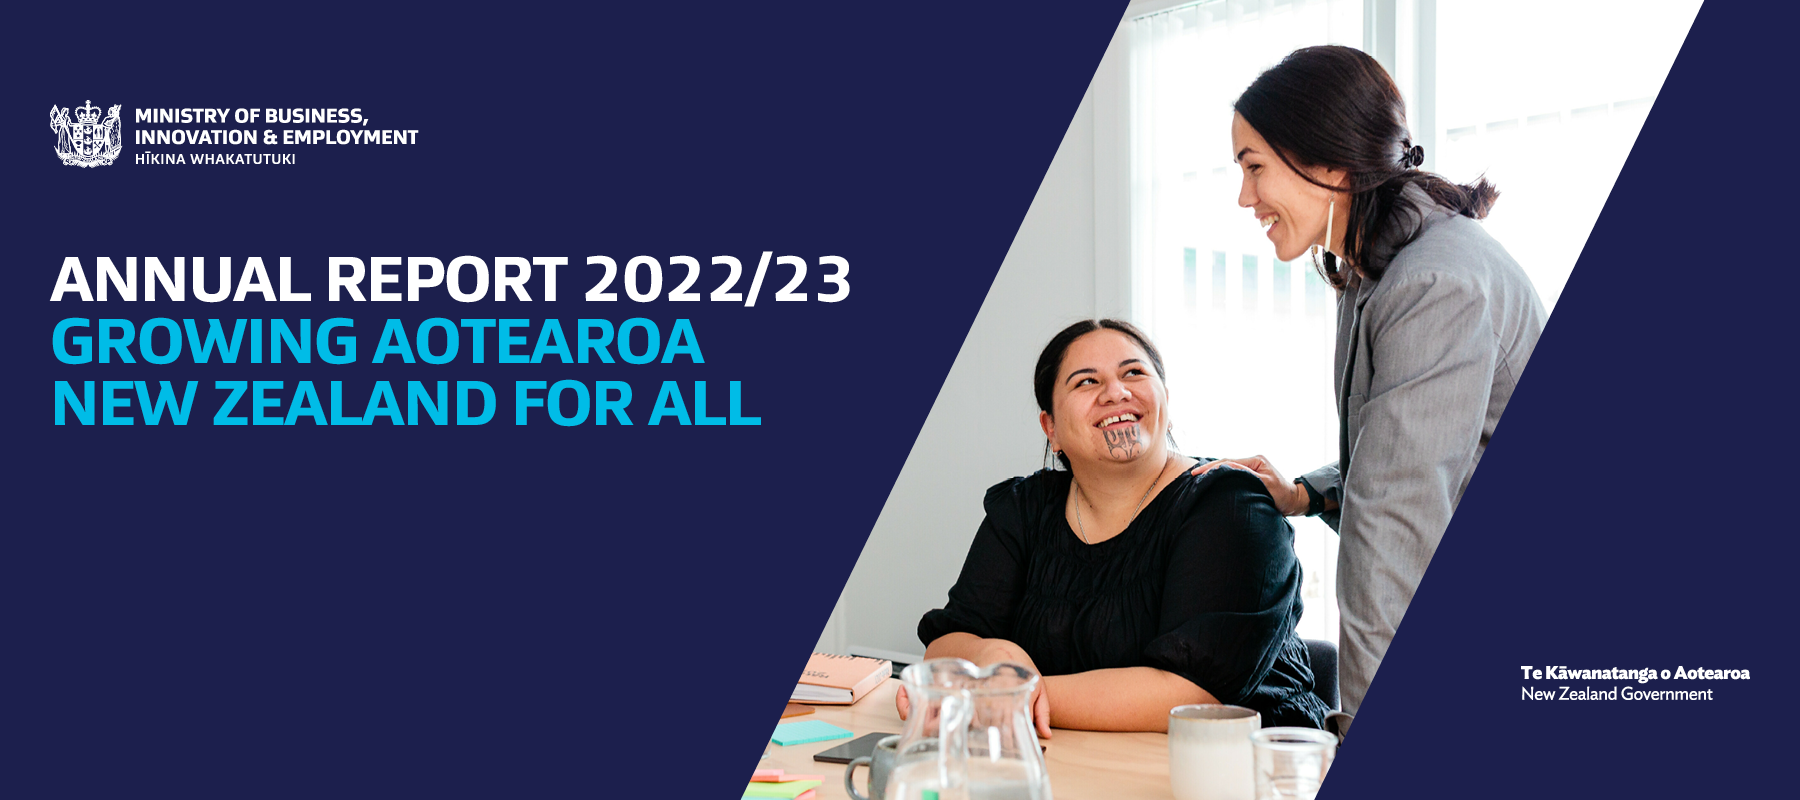 Annual Report 2022/23 - Growing Aotearoa New Zealand for all (front cover of annual report document). Shows a person sitting at table smiling, they are looking up at a person standing next to them with one hand resting on their shoulder.